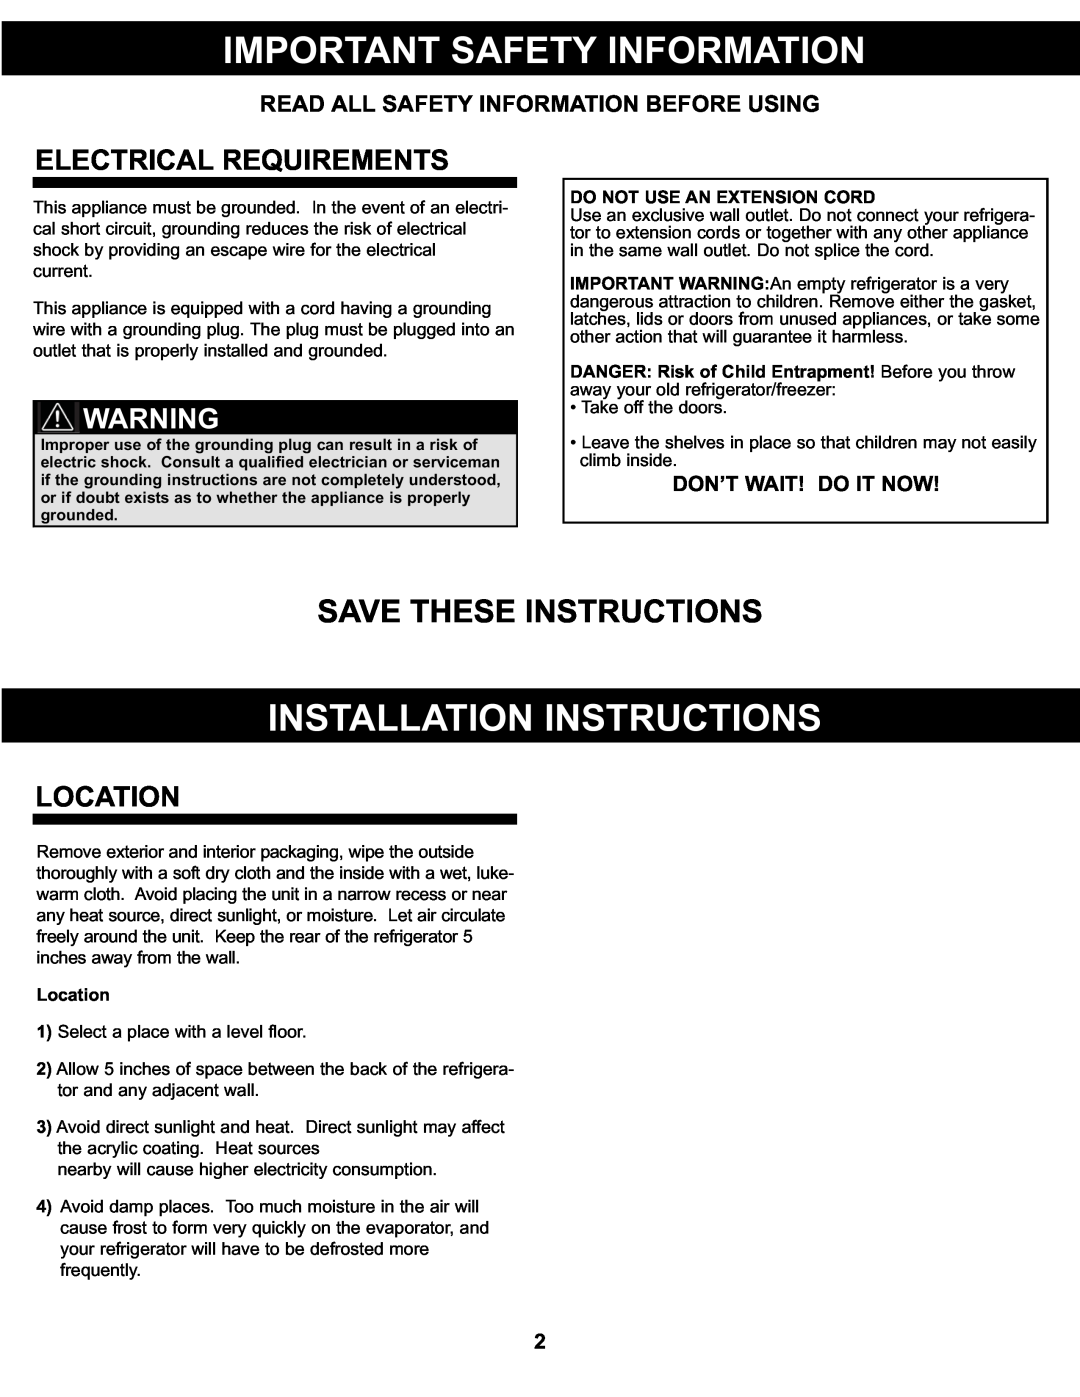 Danby DCR122WDD Important Safety Information, Installation Instructions, Save These Instructions, Electrical Requirements 